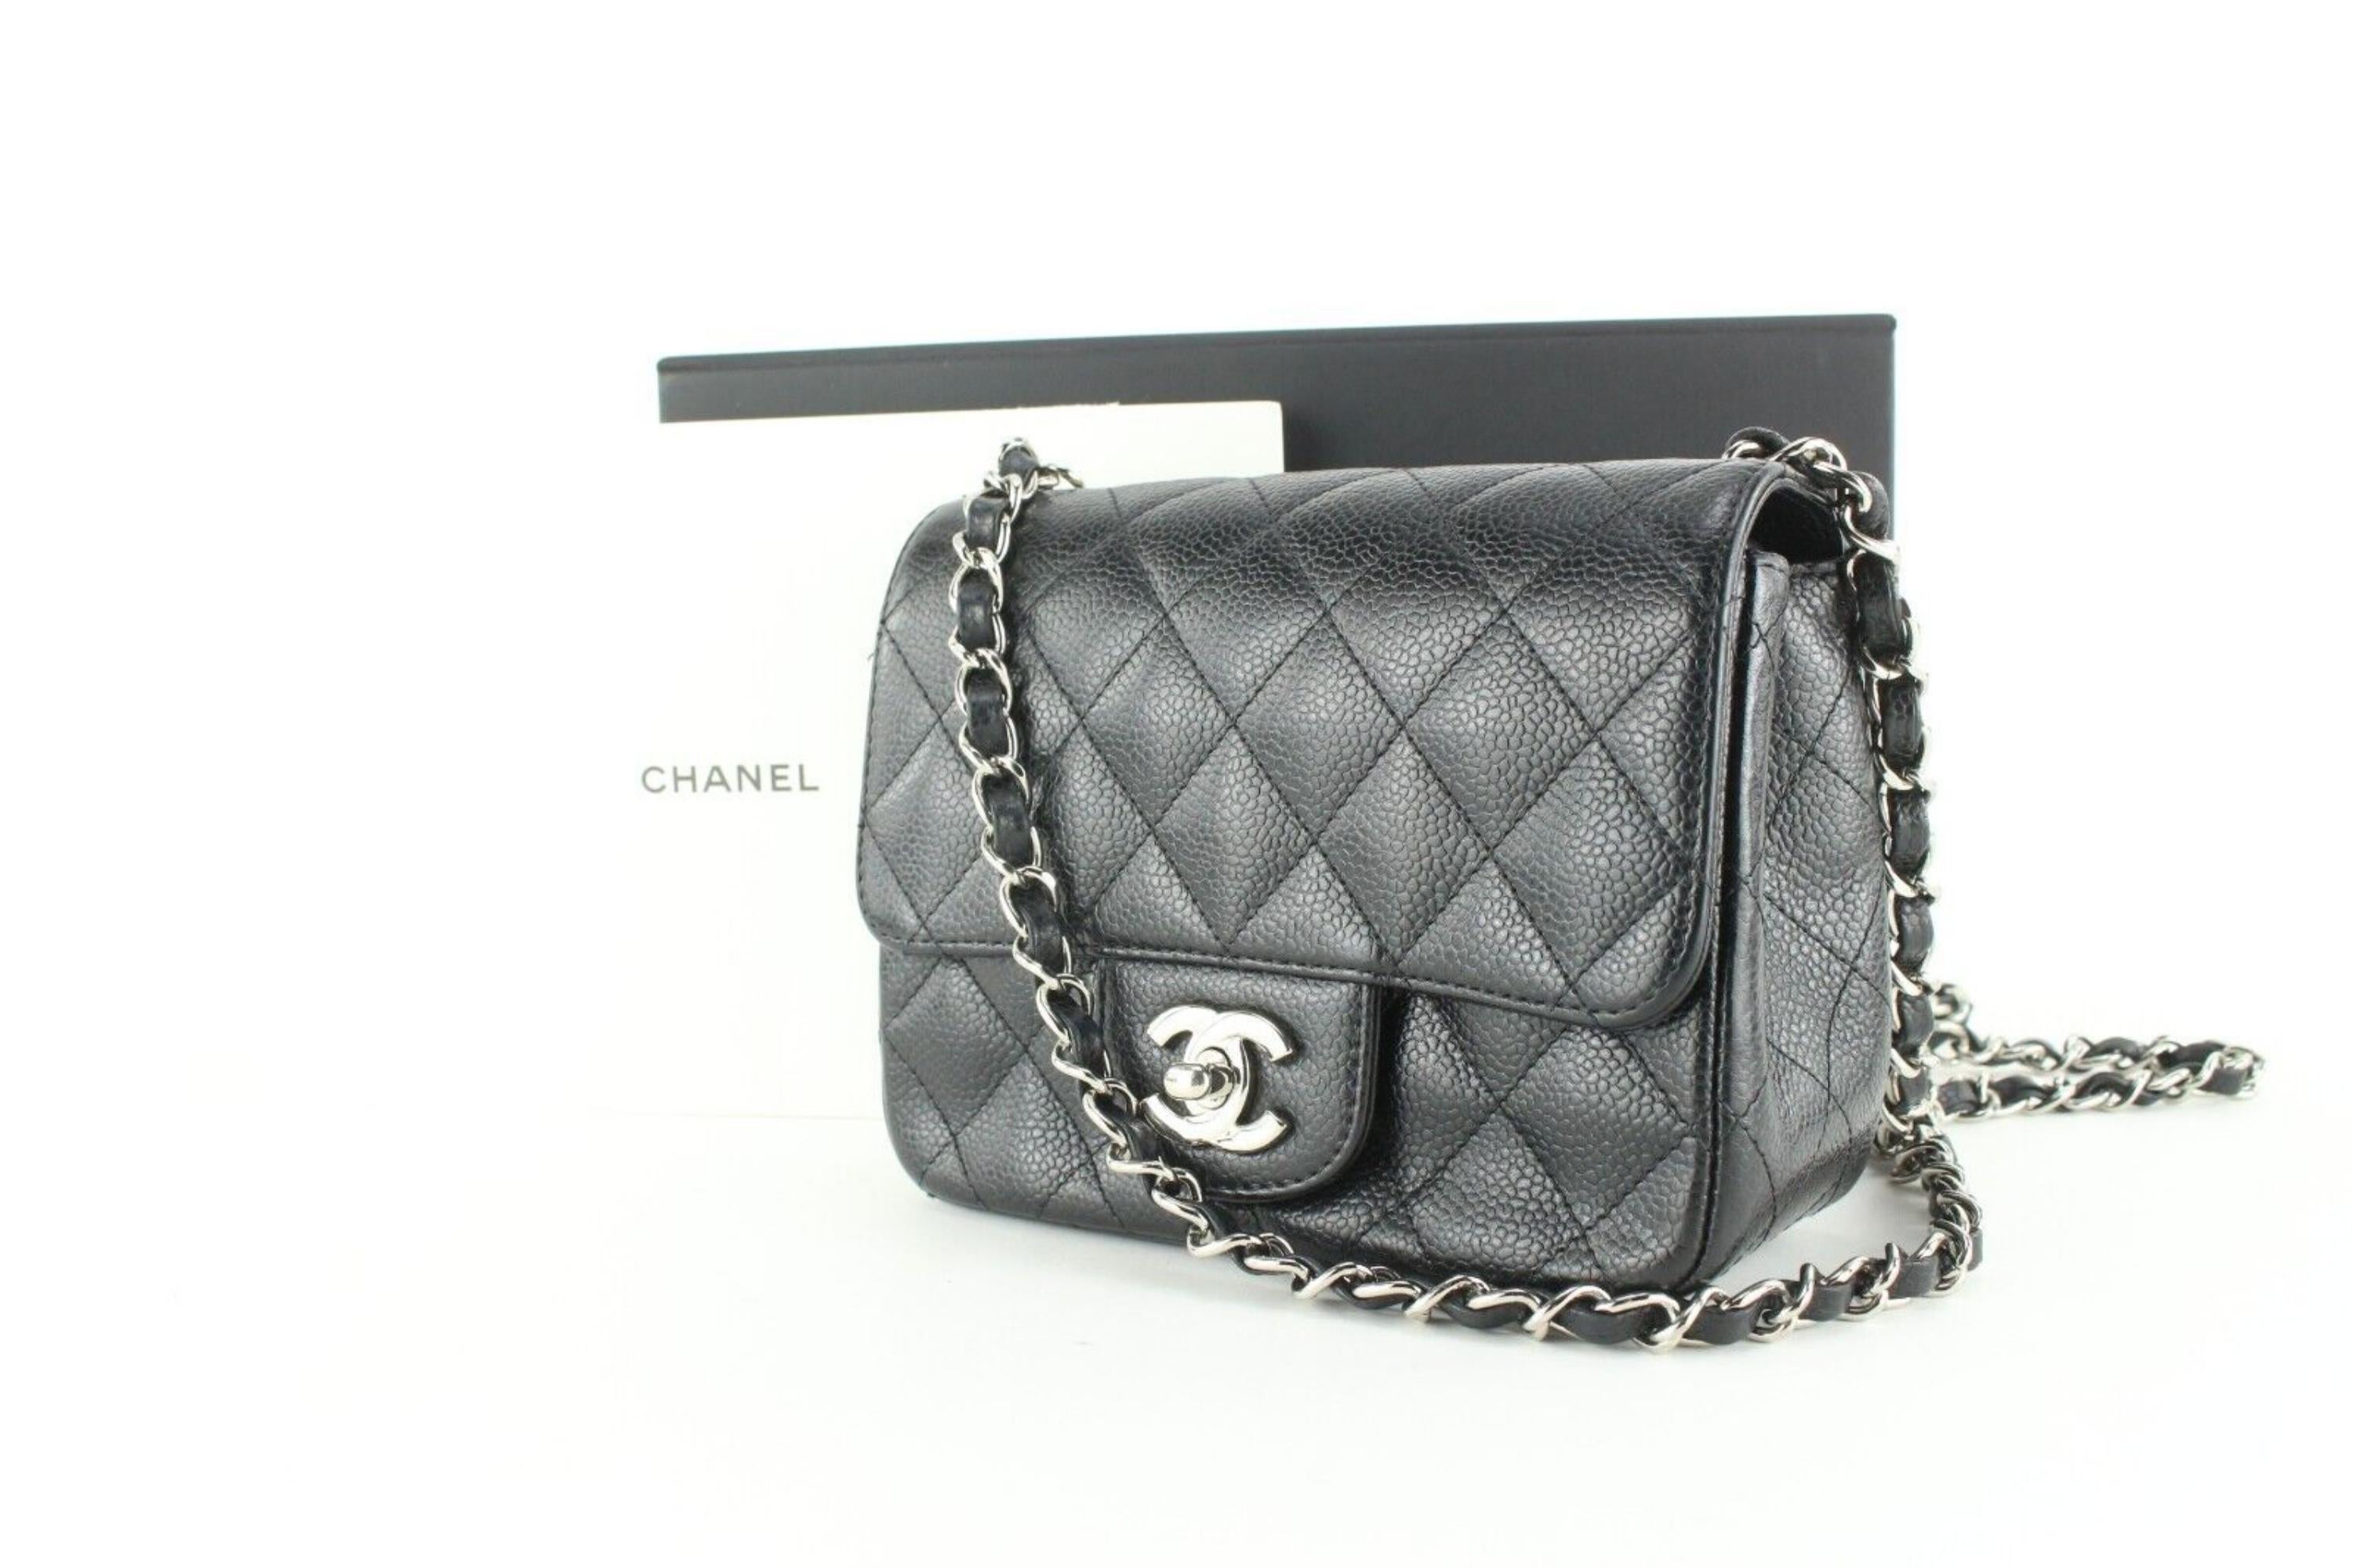 Chanel Black Quilted Caviar Leather Mini Square Classic Flap SHW RARE 19c26a For Sale 7